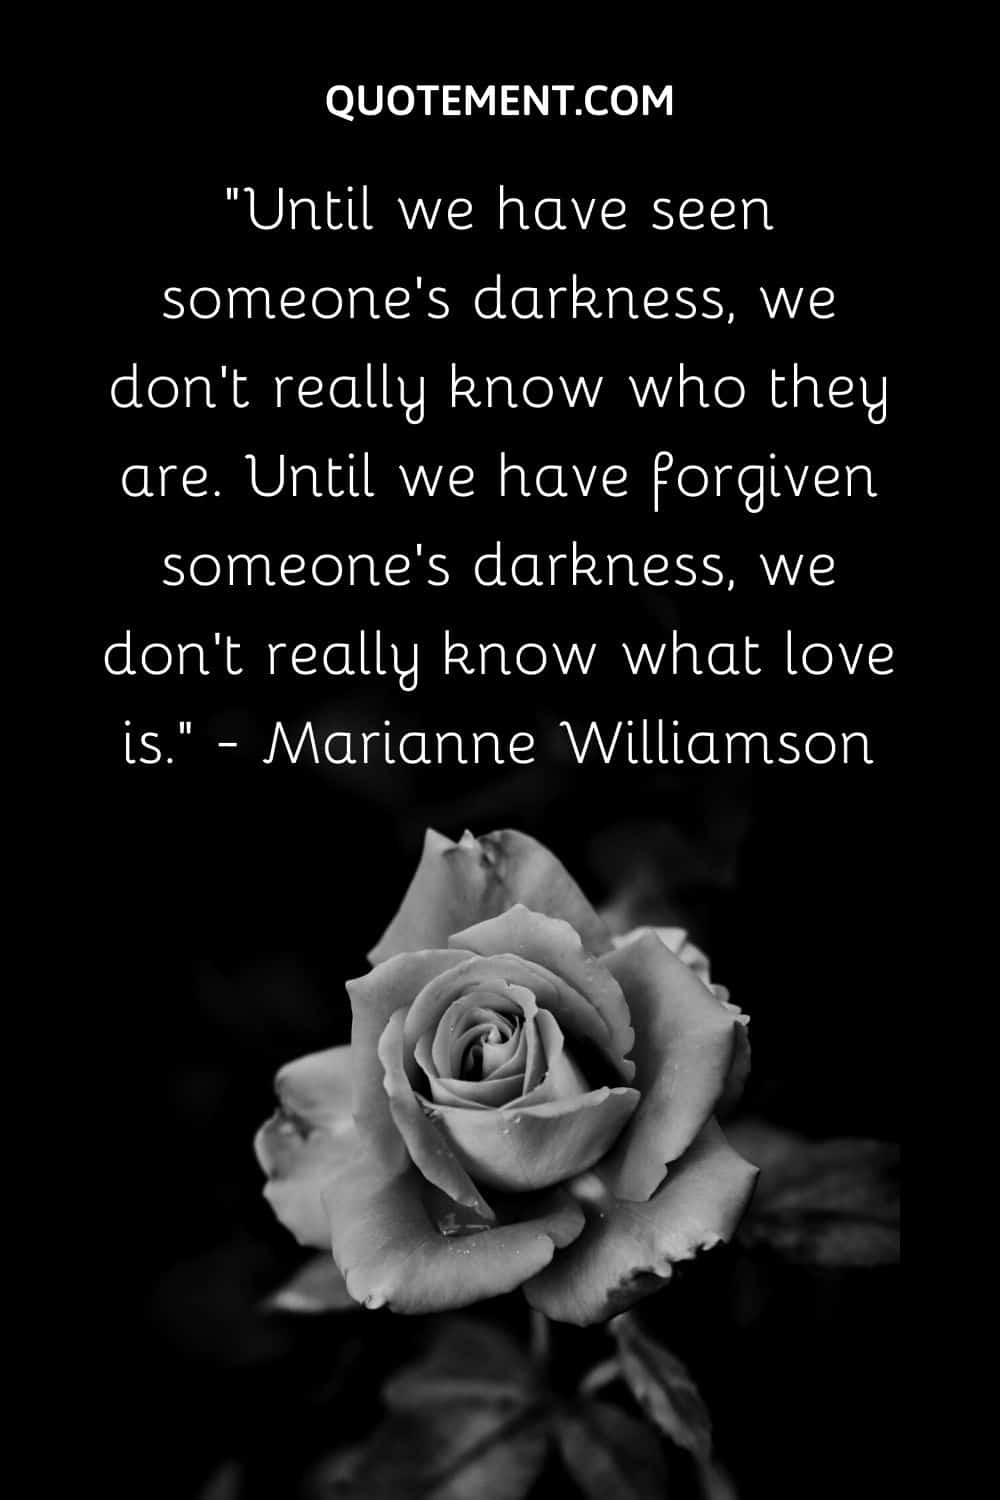 Until we have seen someone's darkness, we don't really know who they are.